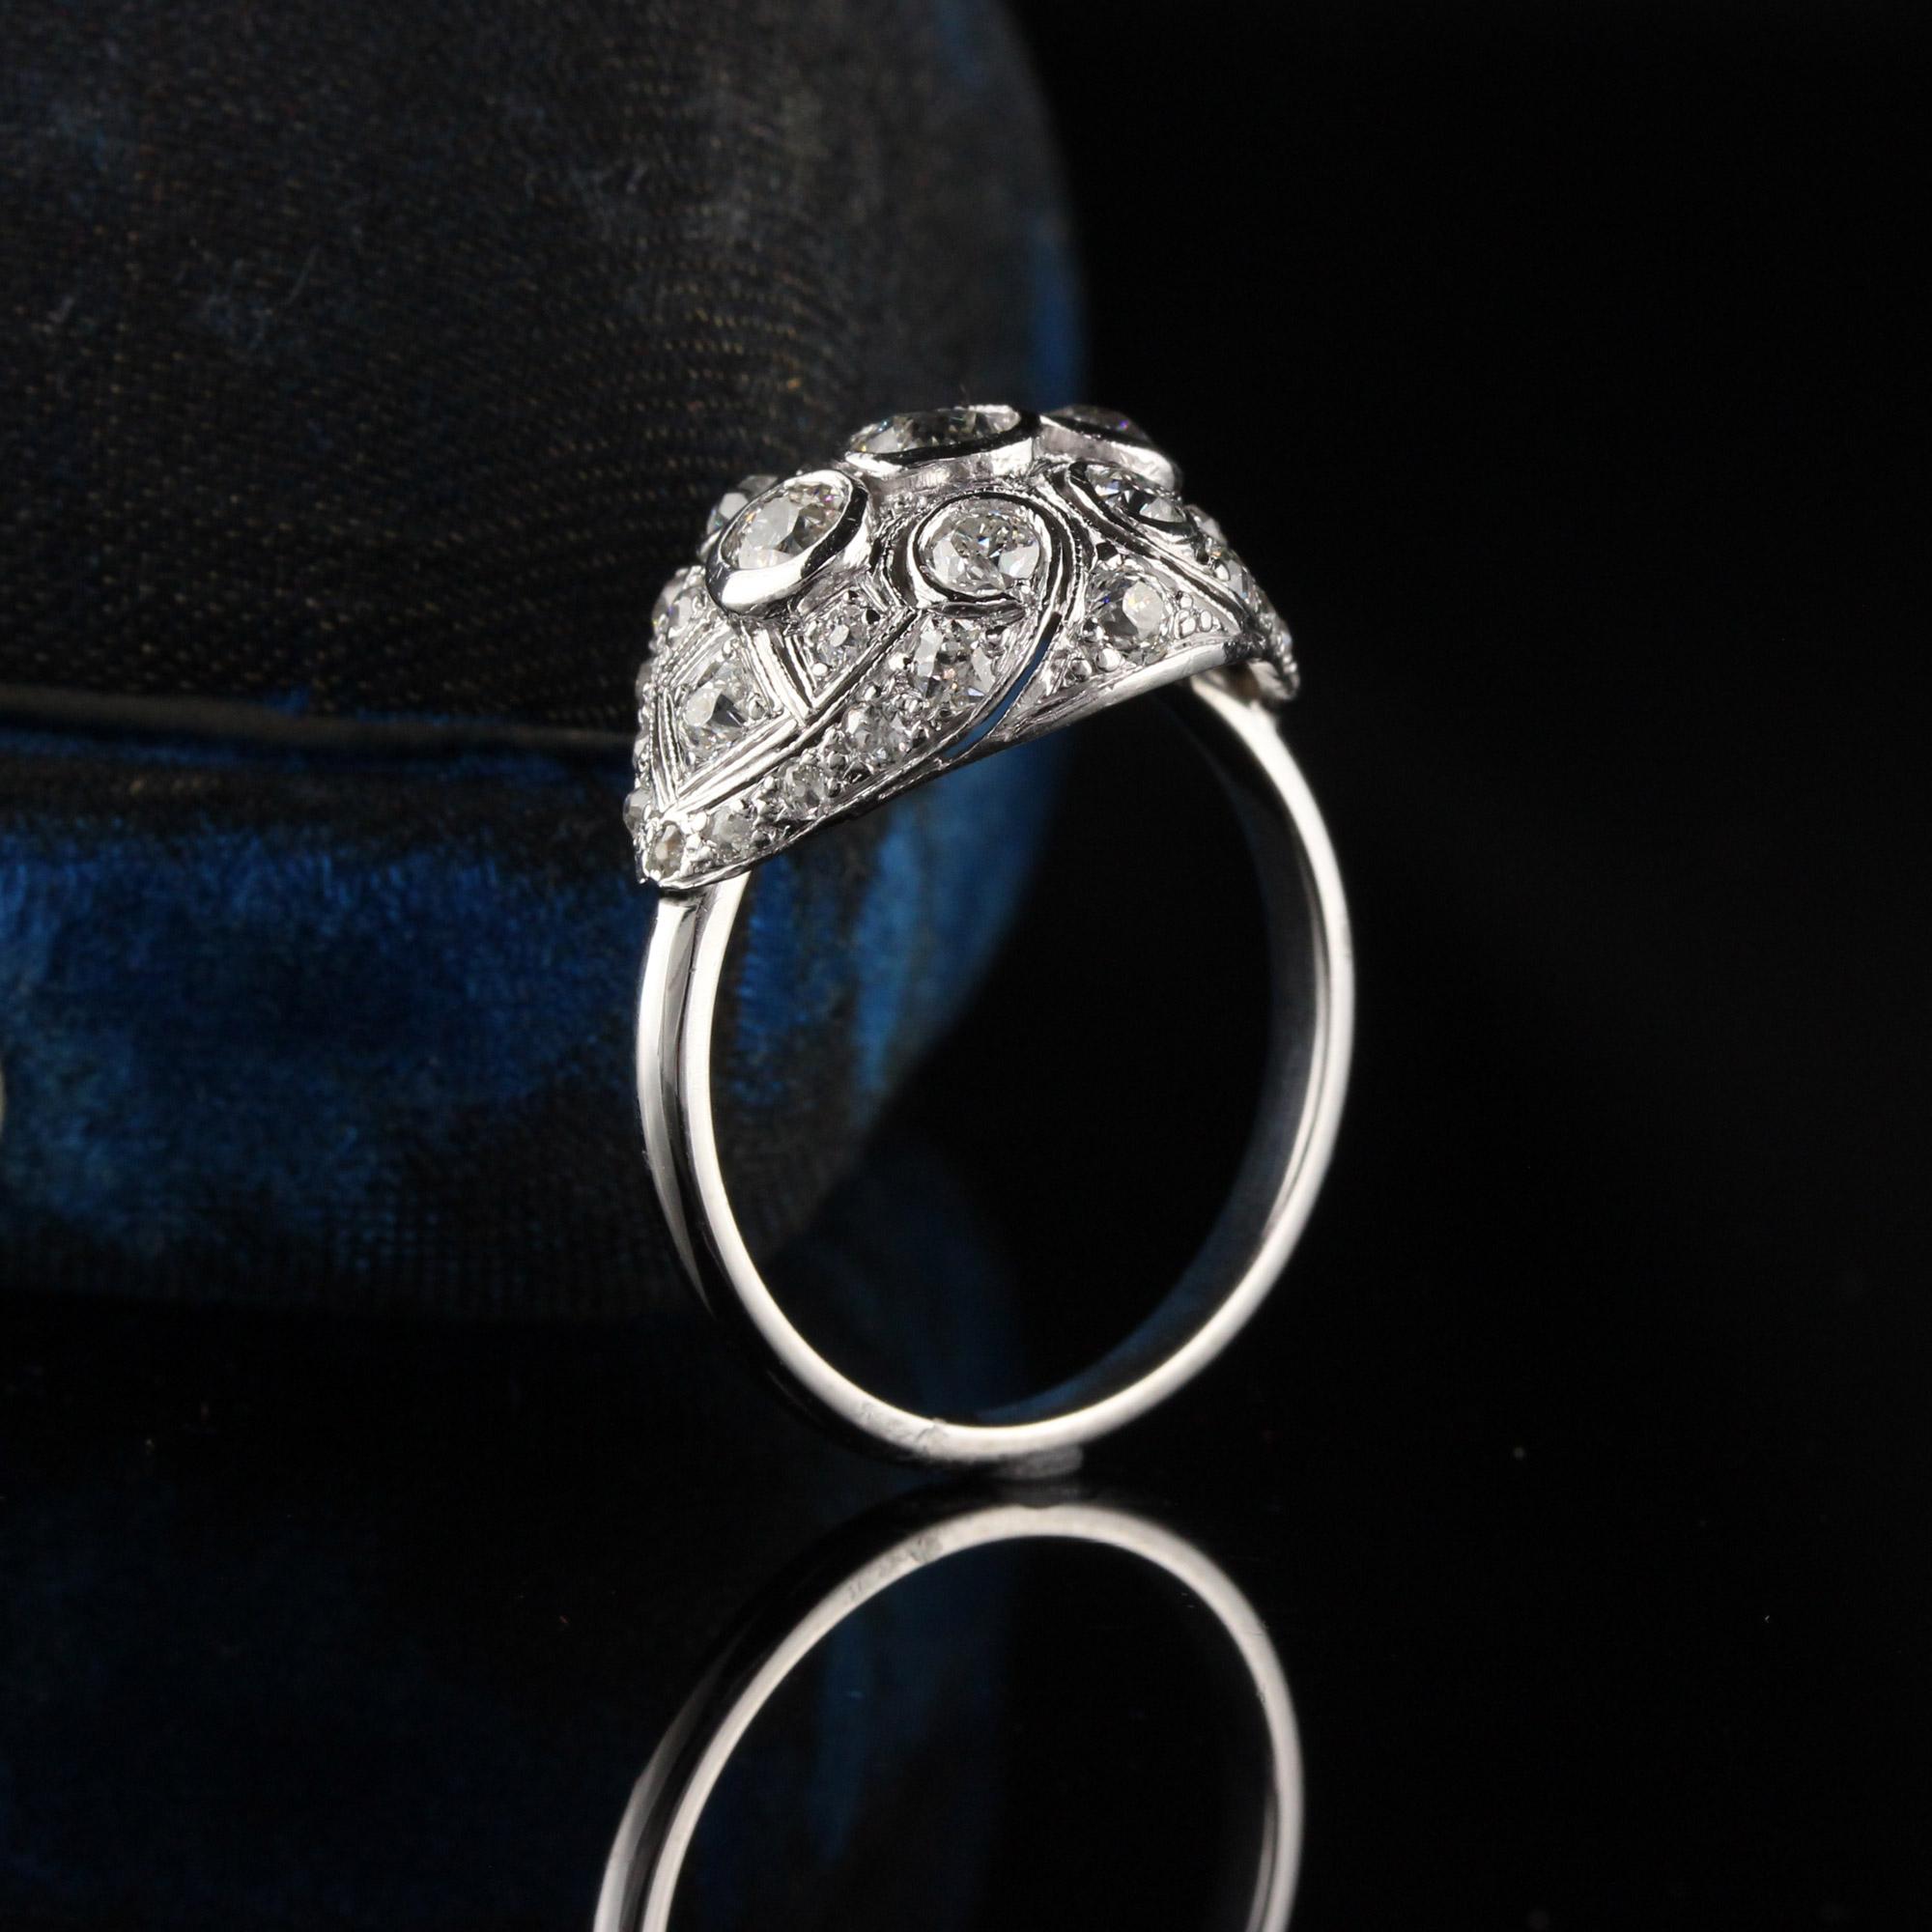 Gorgeous antique platinum engagement ring with old european cut diamonds. 

Item #R0561

Metal: Platinum 

Weight: 5.3 Grams

Total Diamond Weight: Approximately 1.00 cts

Diamond Color: H

Diamond Clarity: VS2

Ring Size: 6.5 

This ring can be